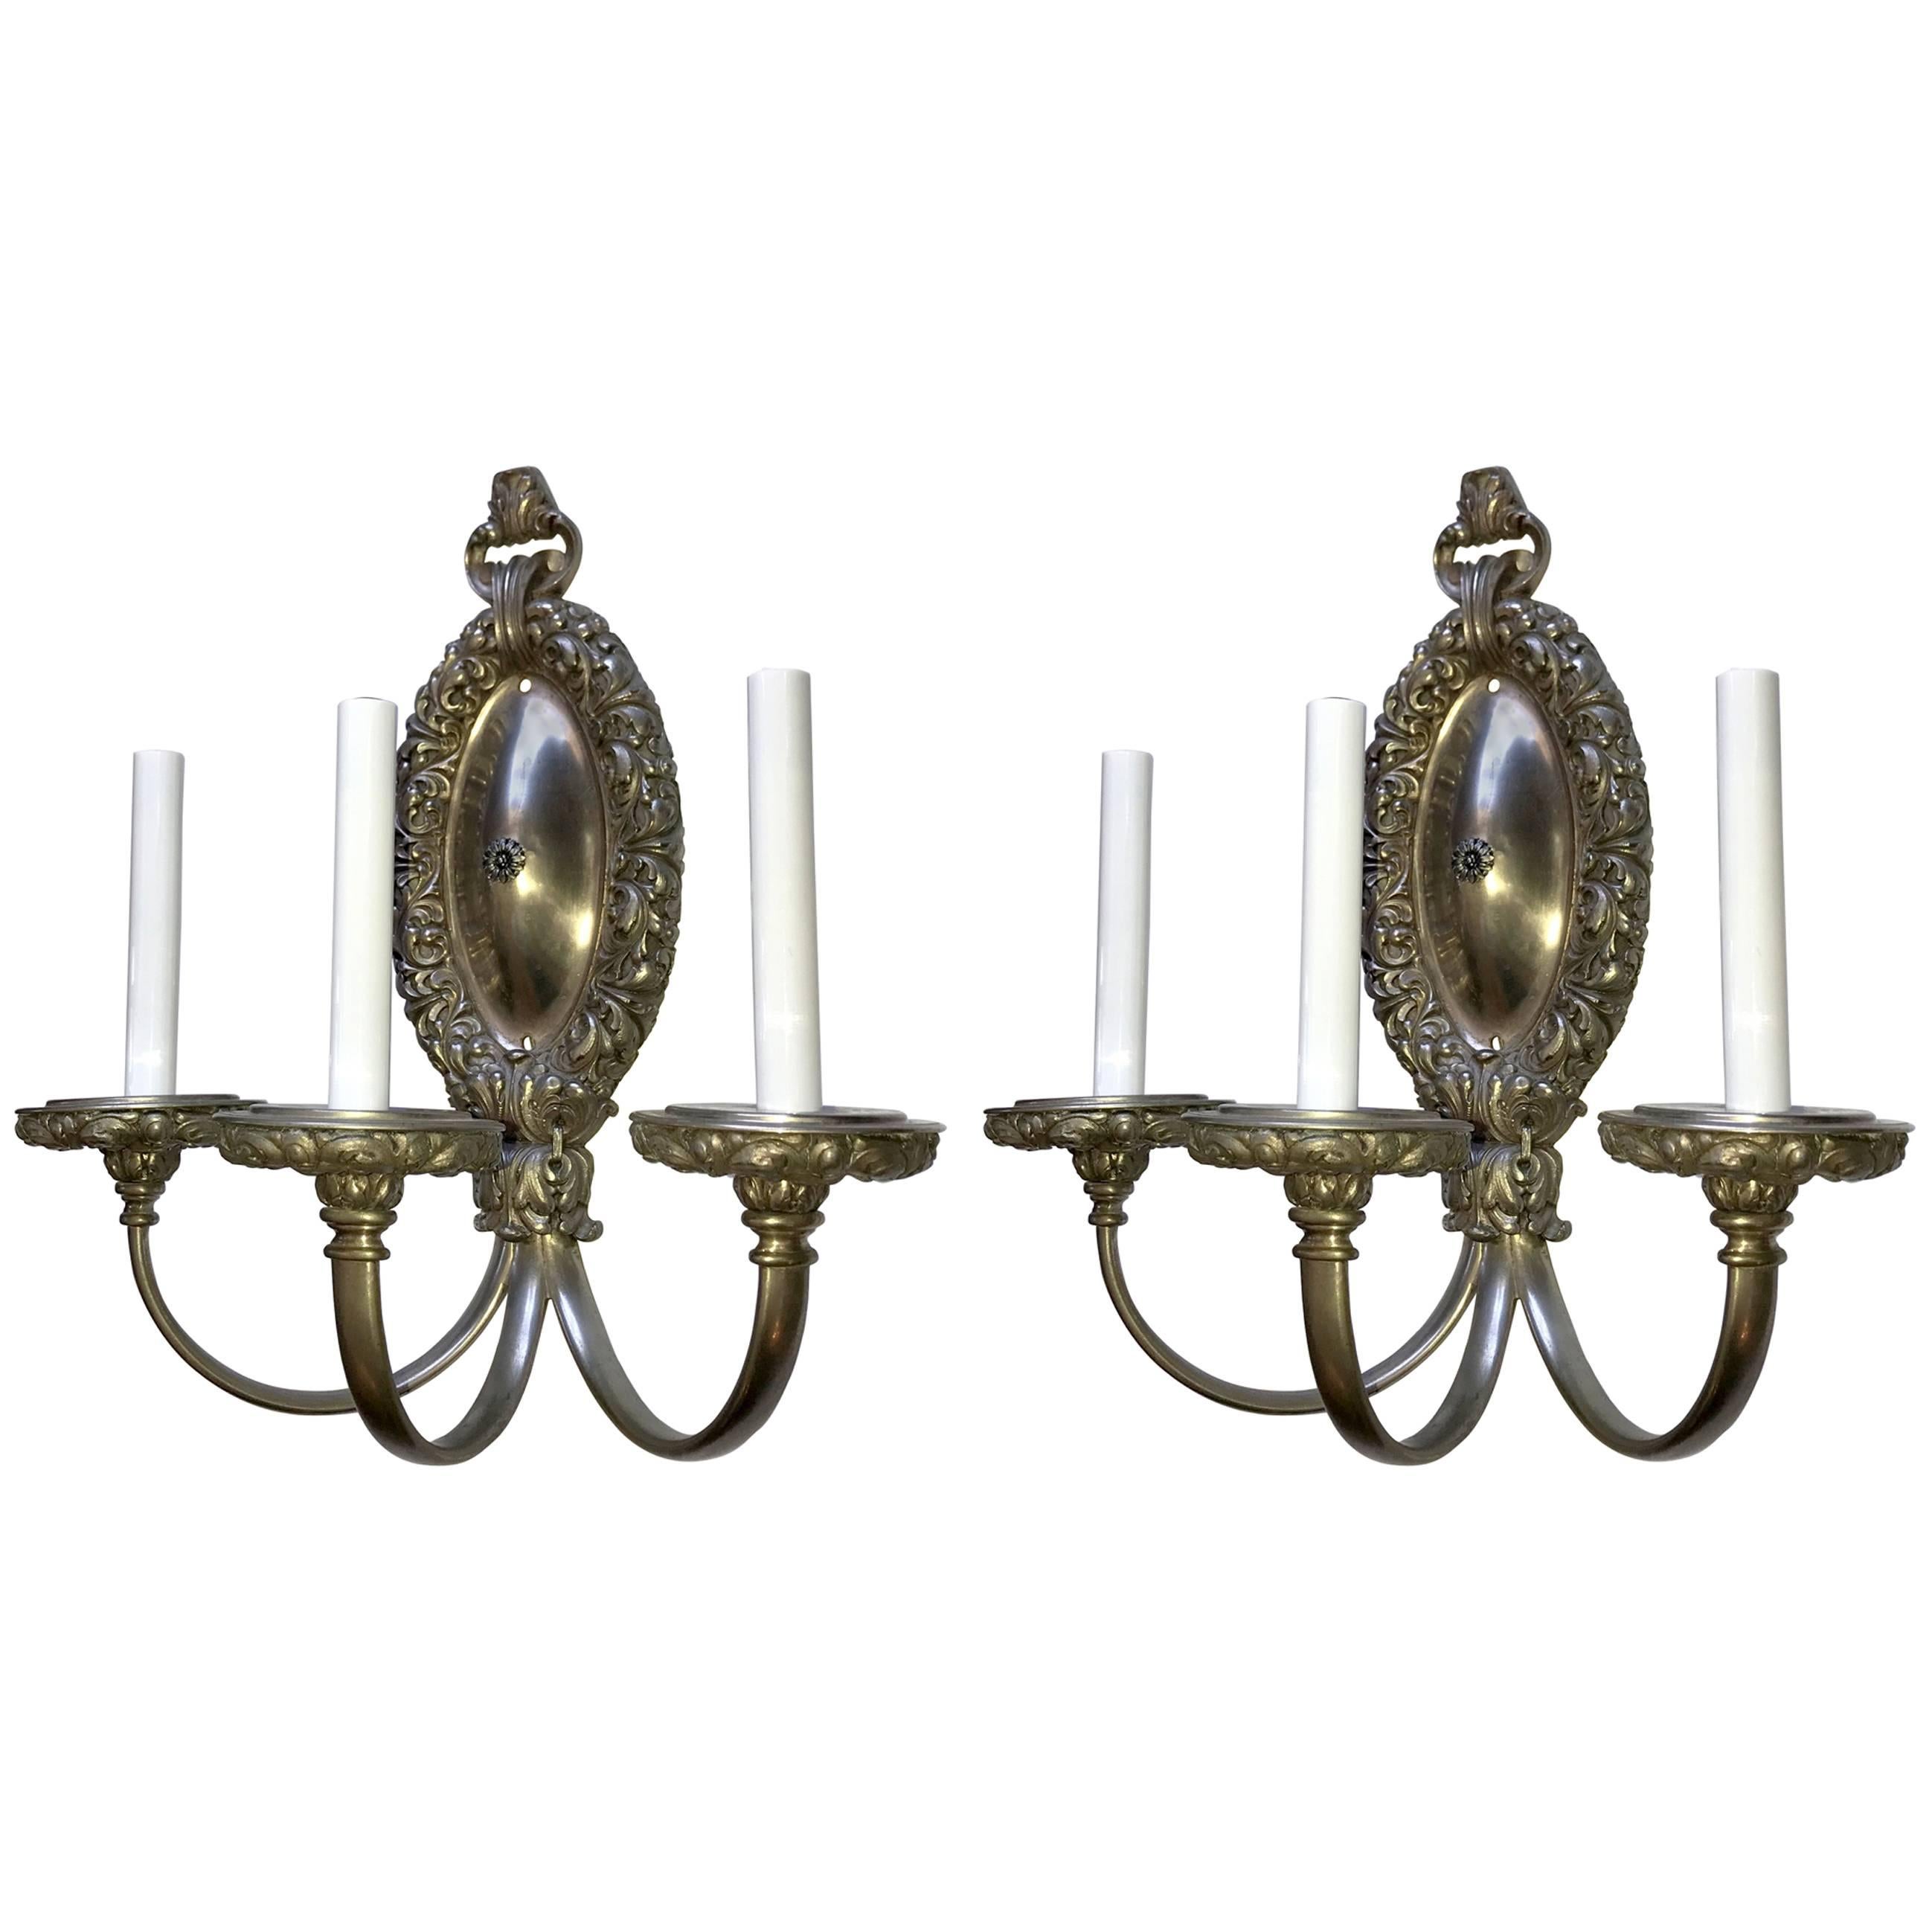 Wonderful Pair of Brushed Silvered Bronze Filigree Neoclassical Caldwell Sconces For Sale